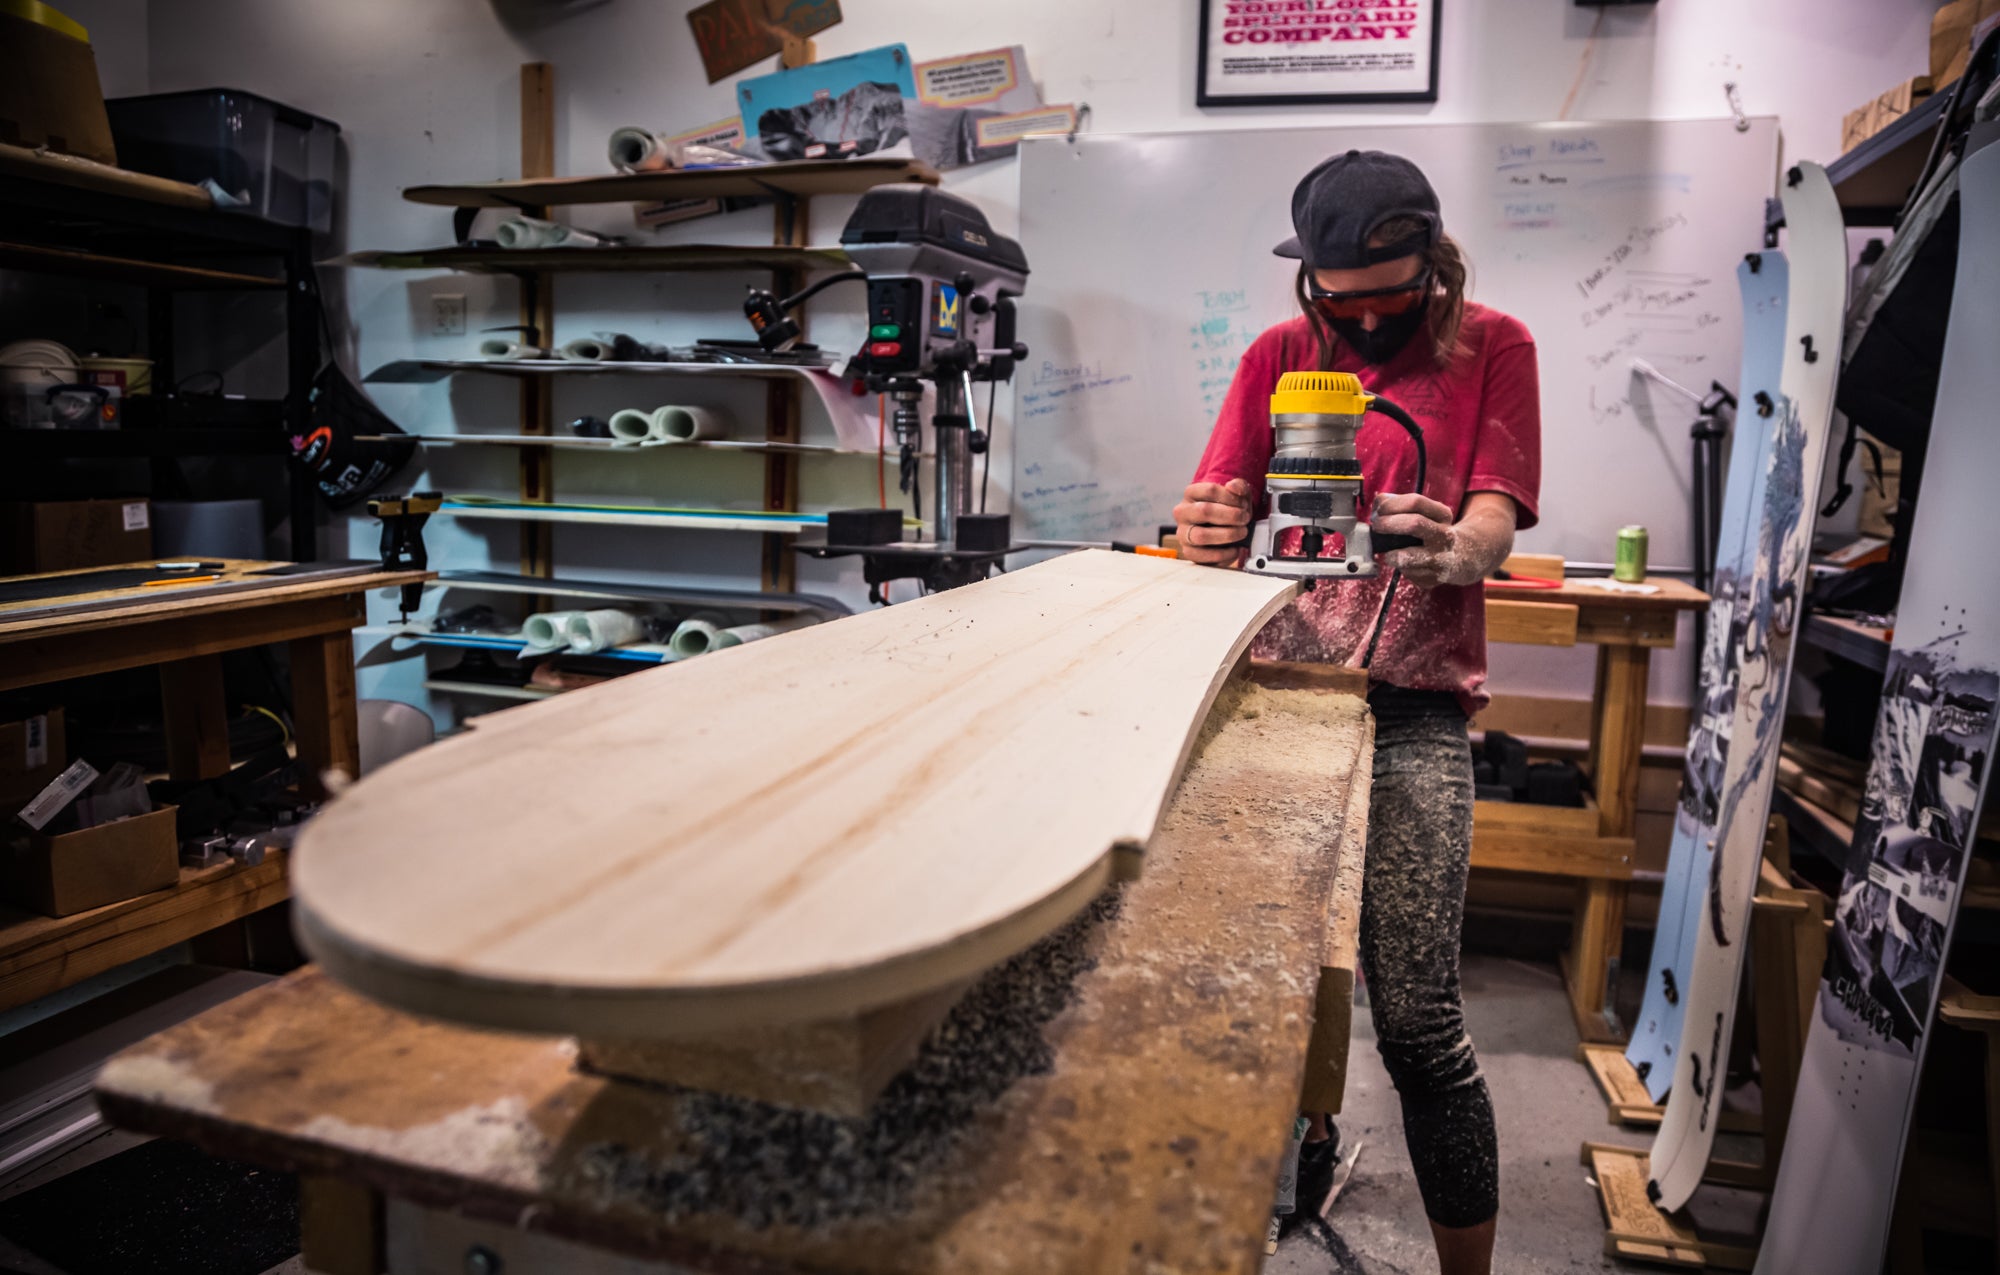 Image of a woman wearing eye protection and focused on using a router tool in the Pallas Snowboards workshop. They are cutting a wood core to the specific shape and length. The woman and the workbench are covered in wood shavings.